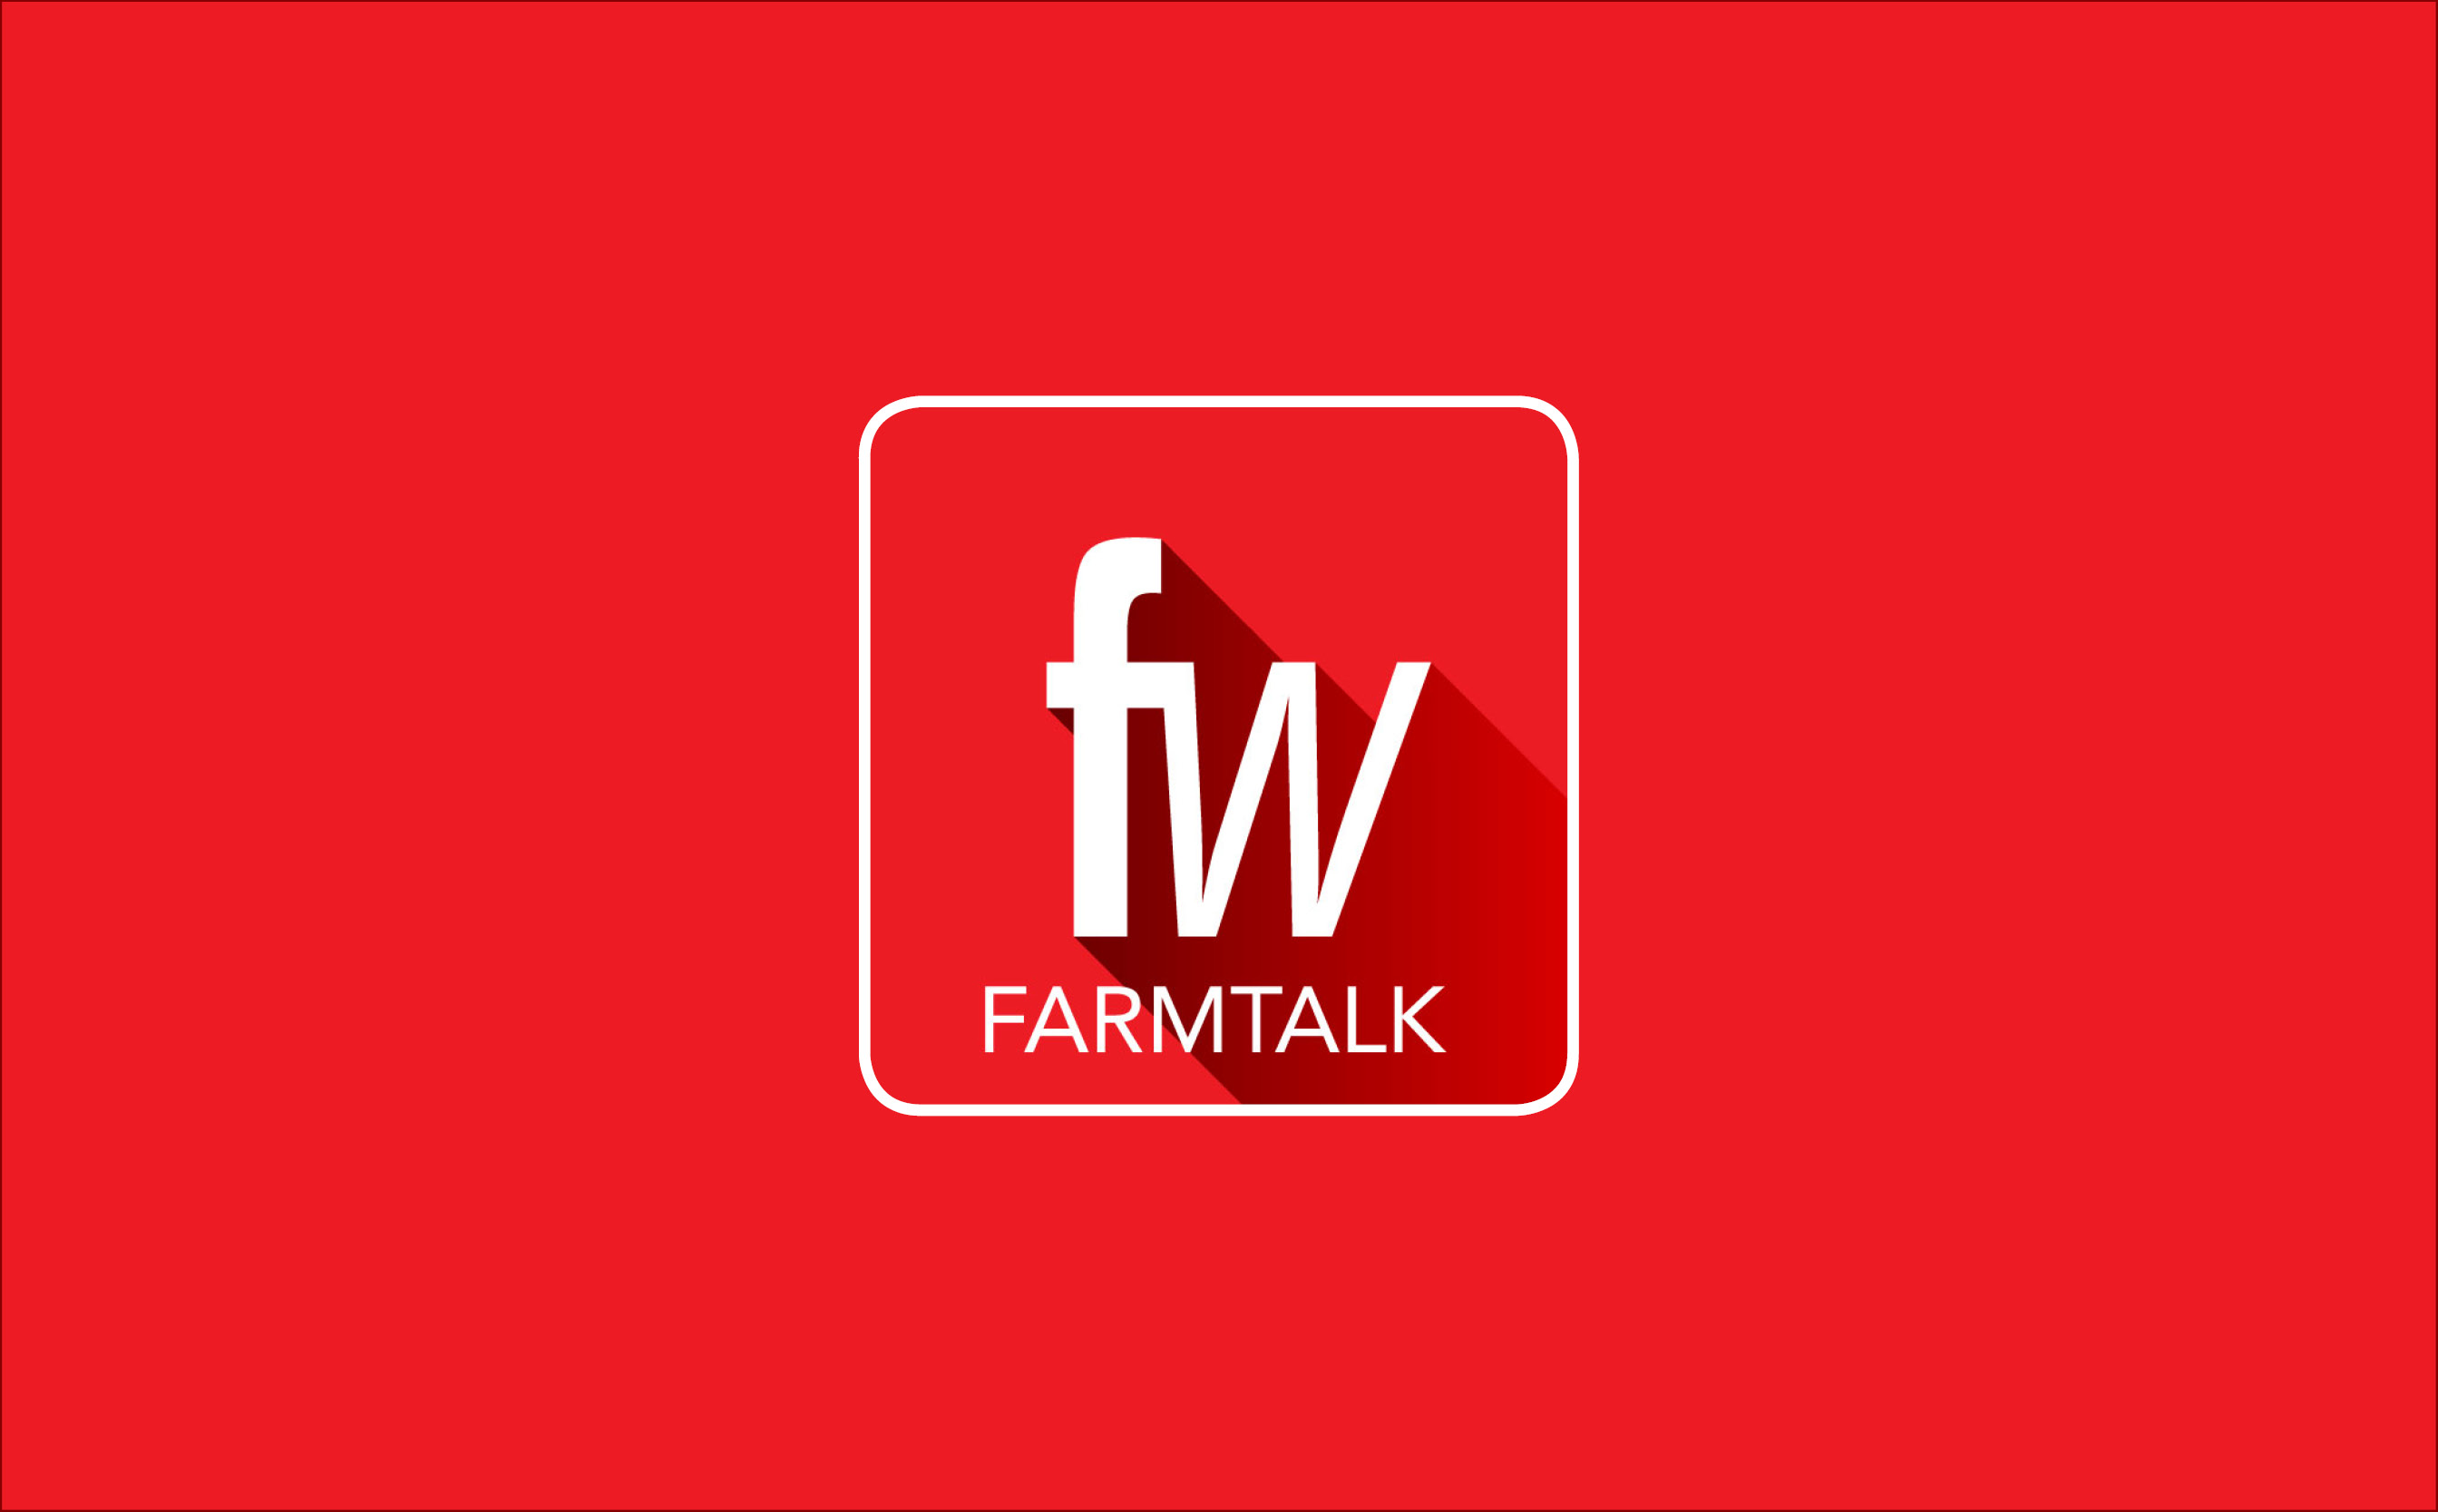 FARMTALK: we want to get to know you better